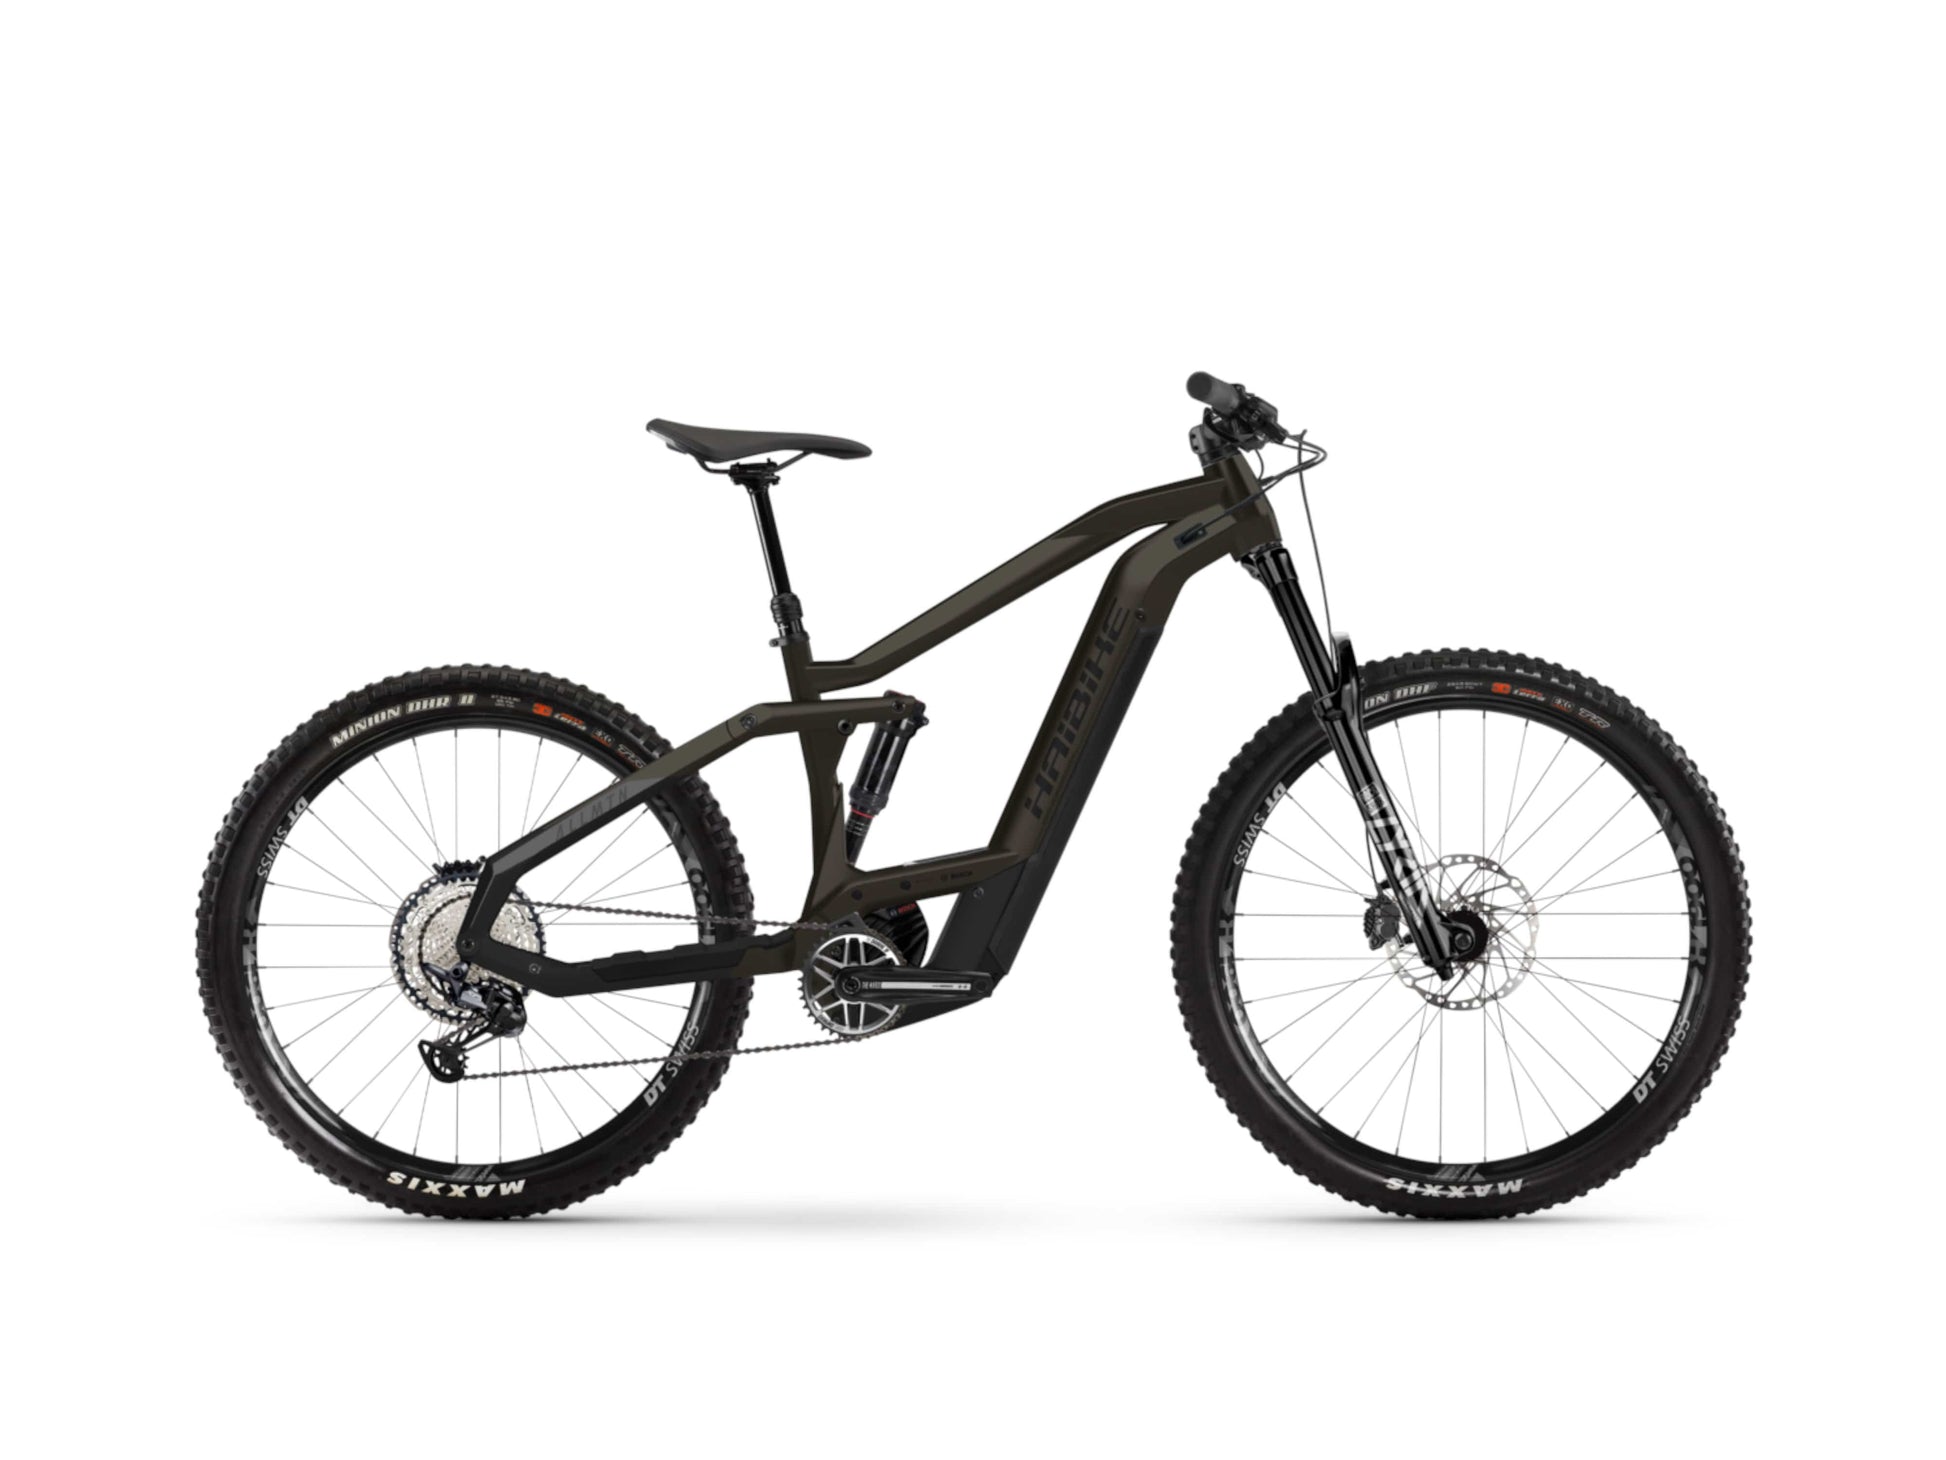 Haibike AllMtn 5 For Sale  Fly Rides USA – Fly Rides USA